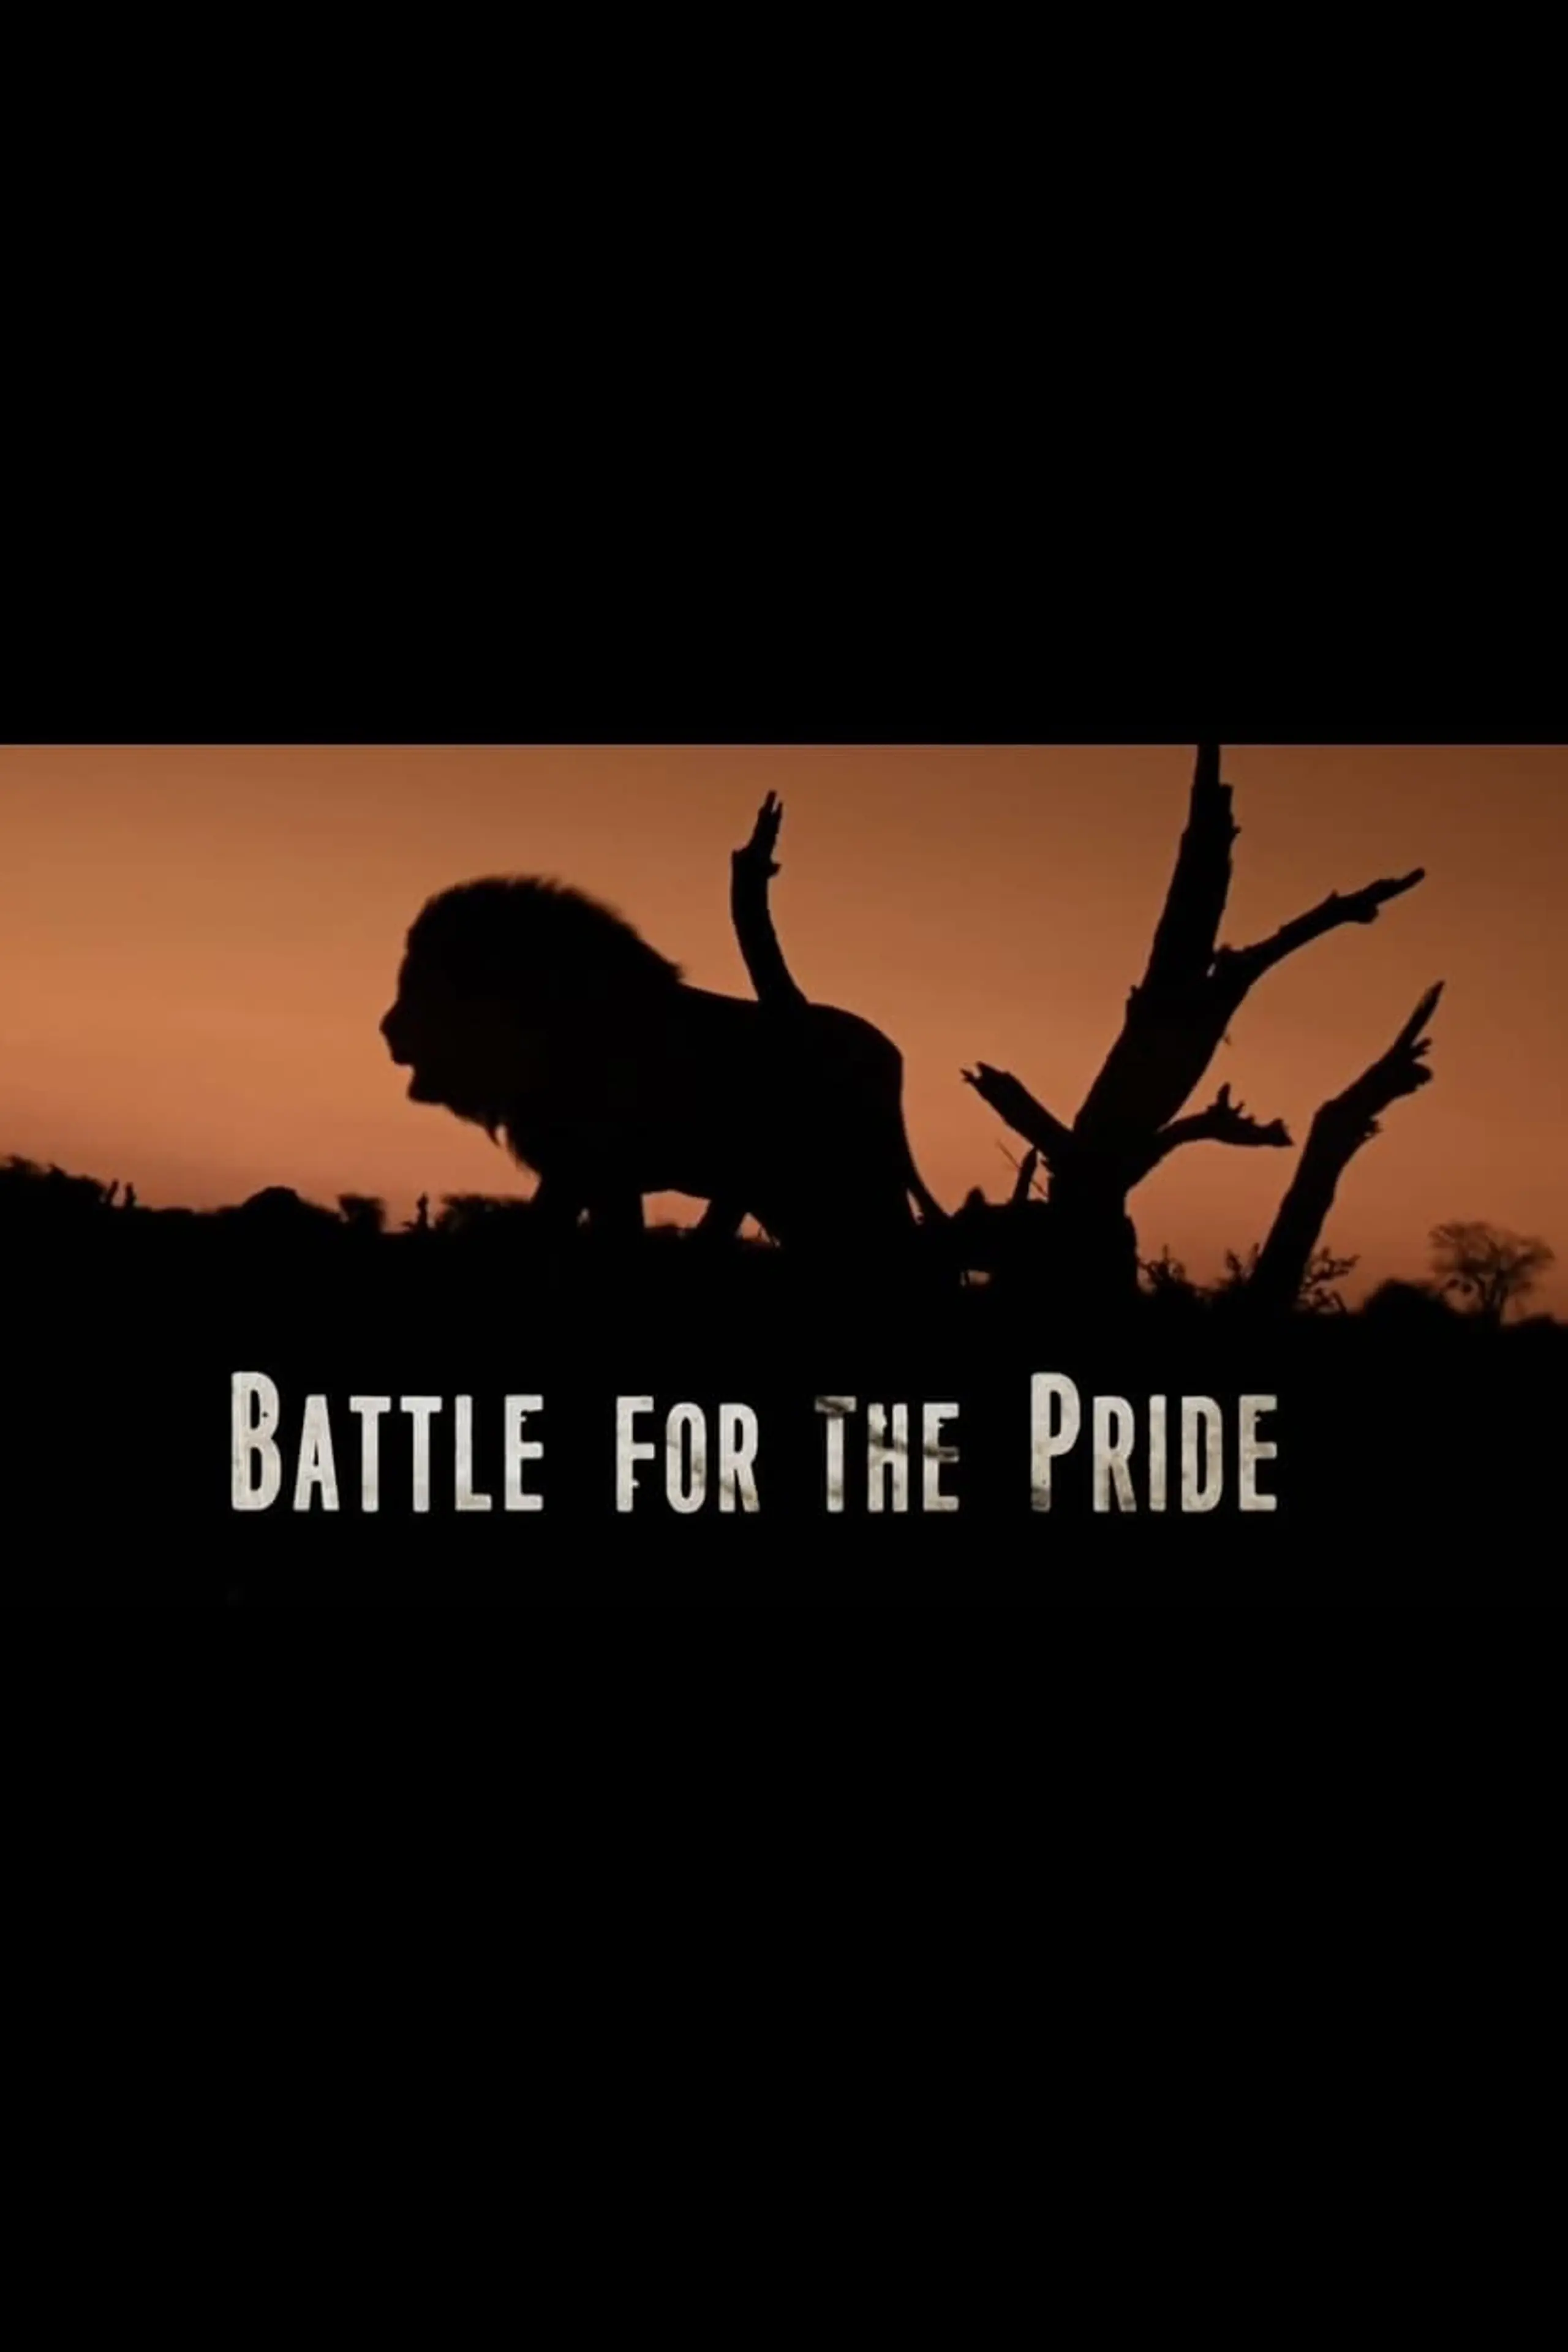 Battle for the Pride